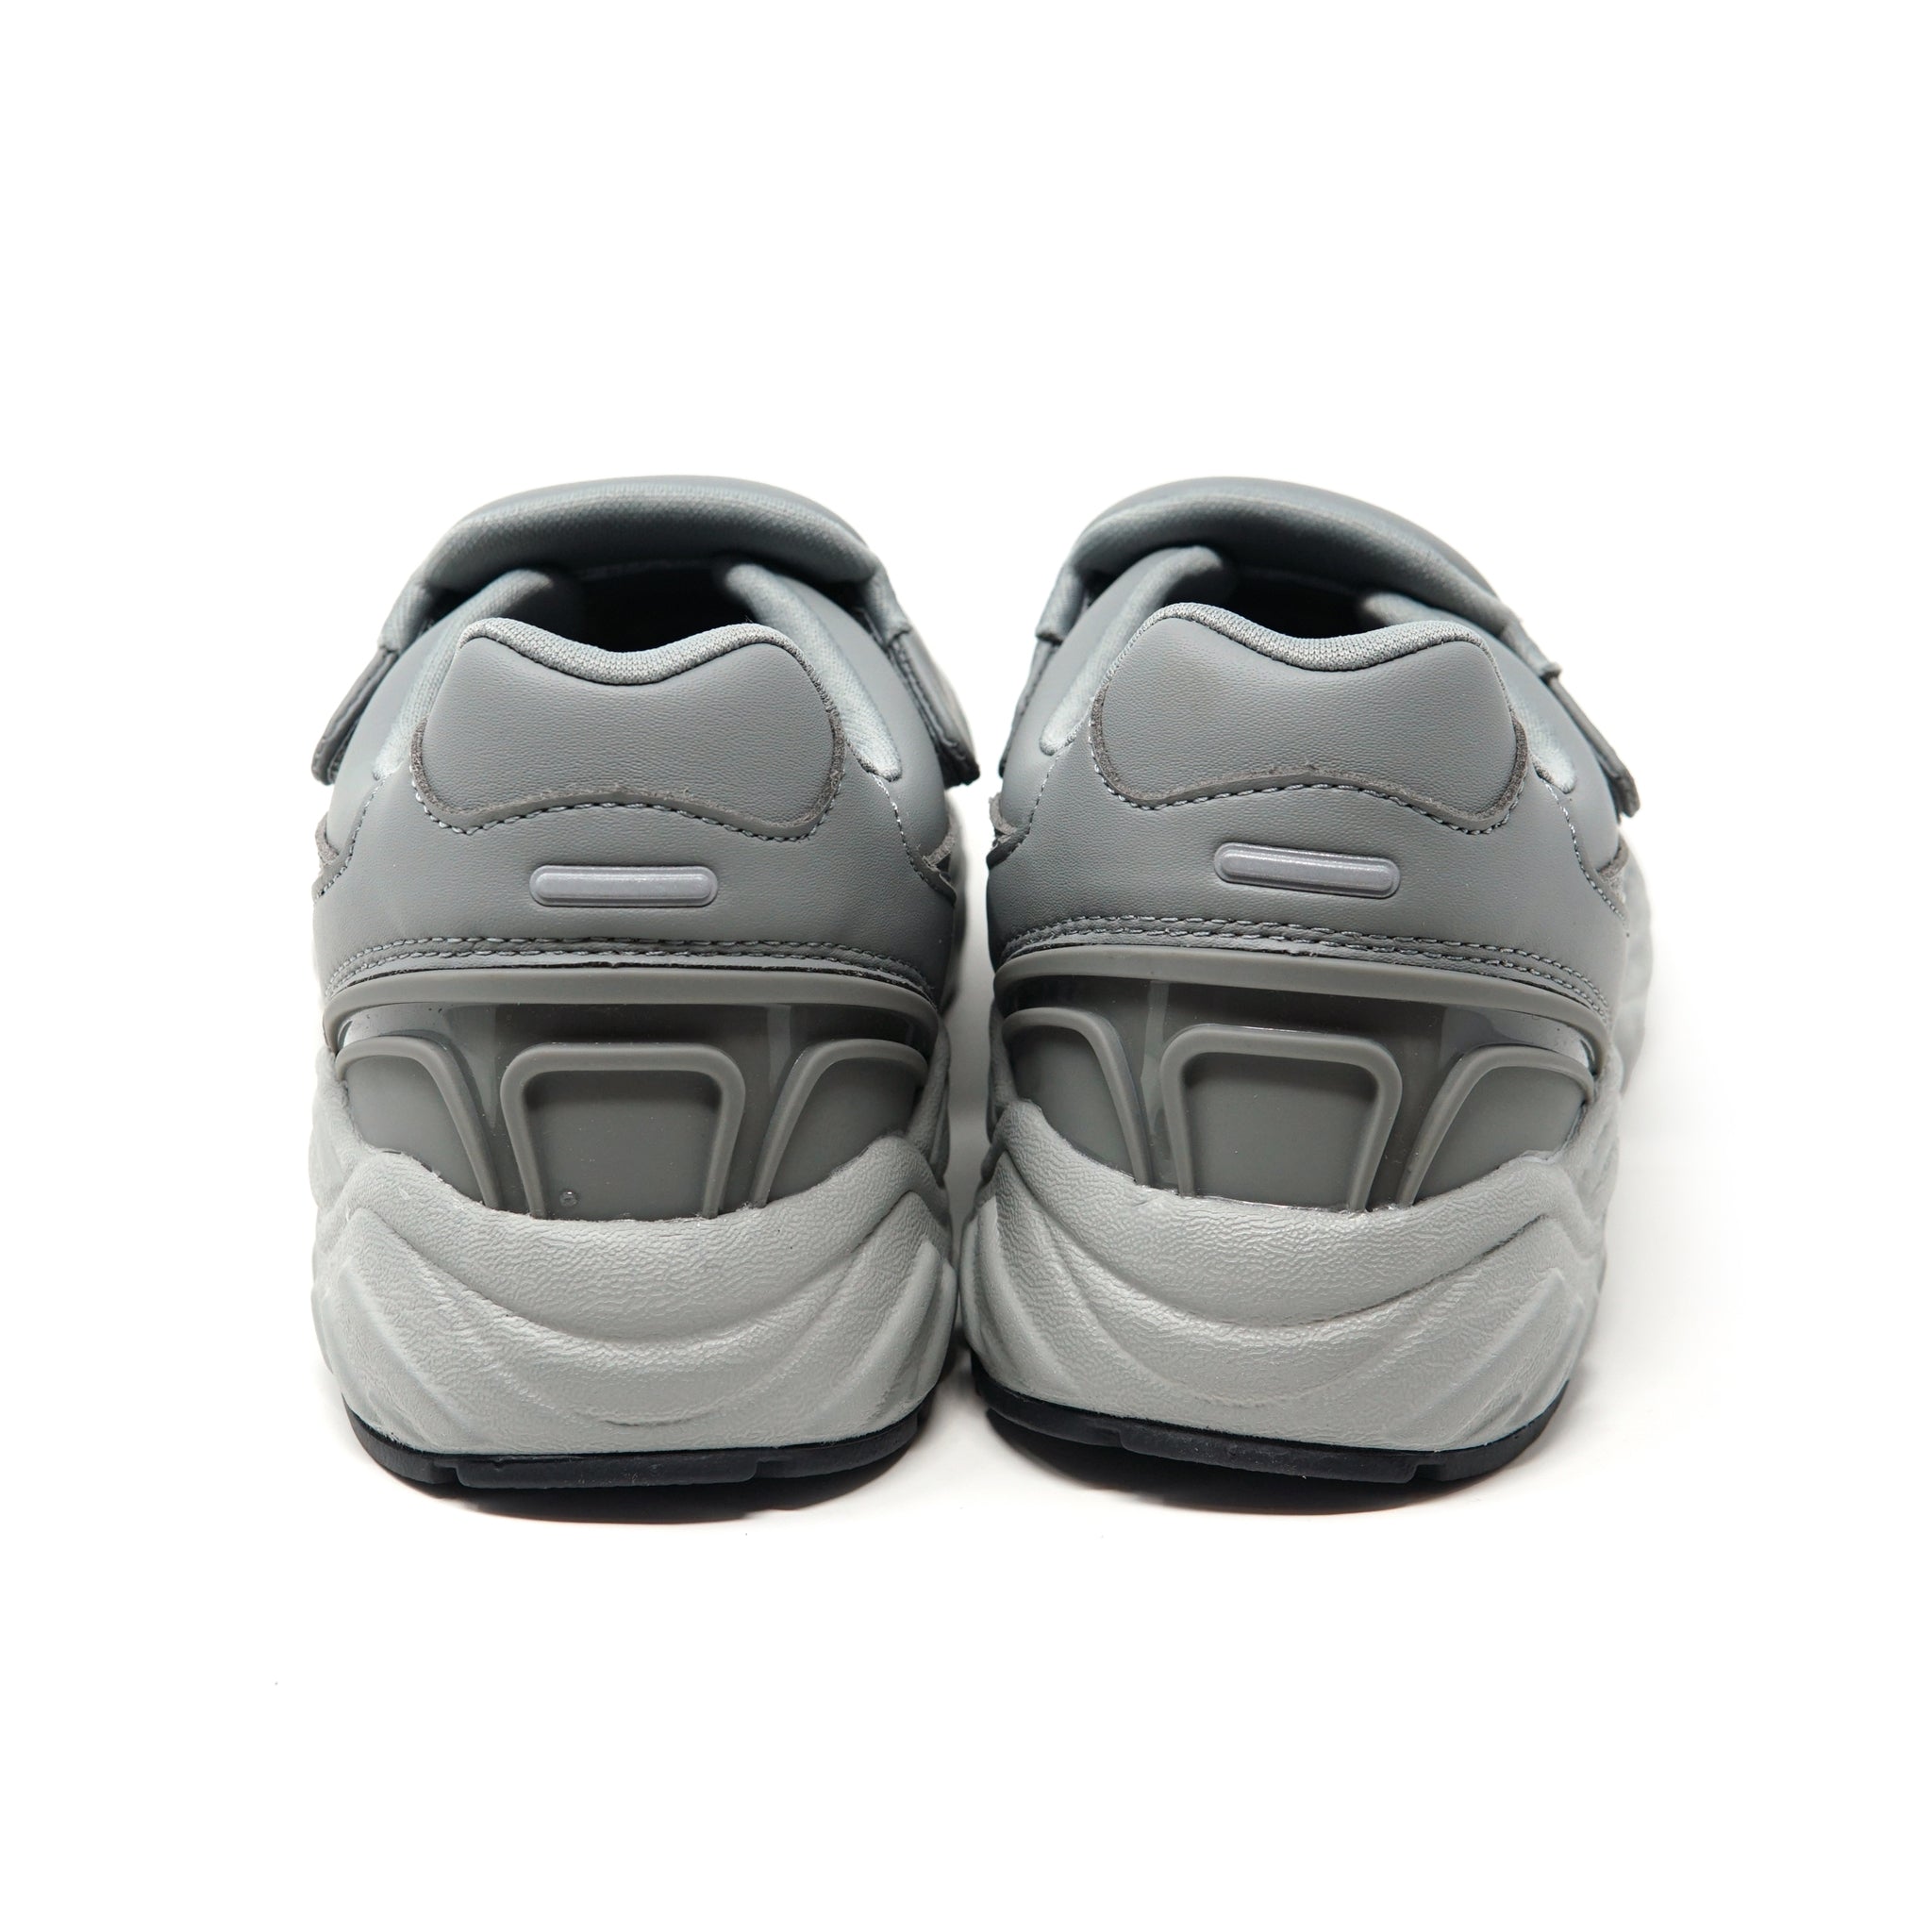 NO:ET029 | Name:BAND STUDEN バンドスチューデン | Color:Gray【810S_